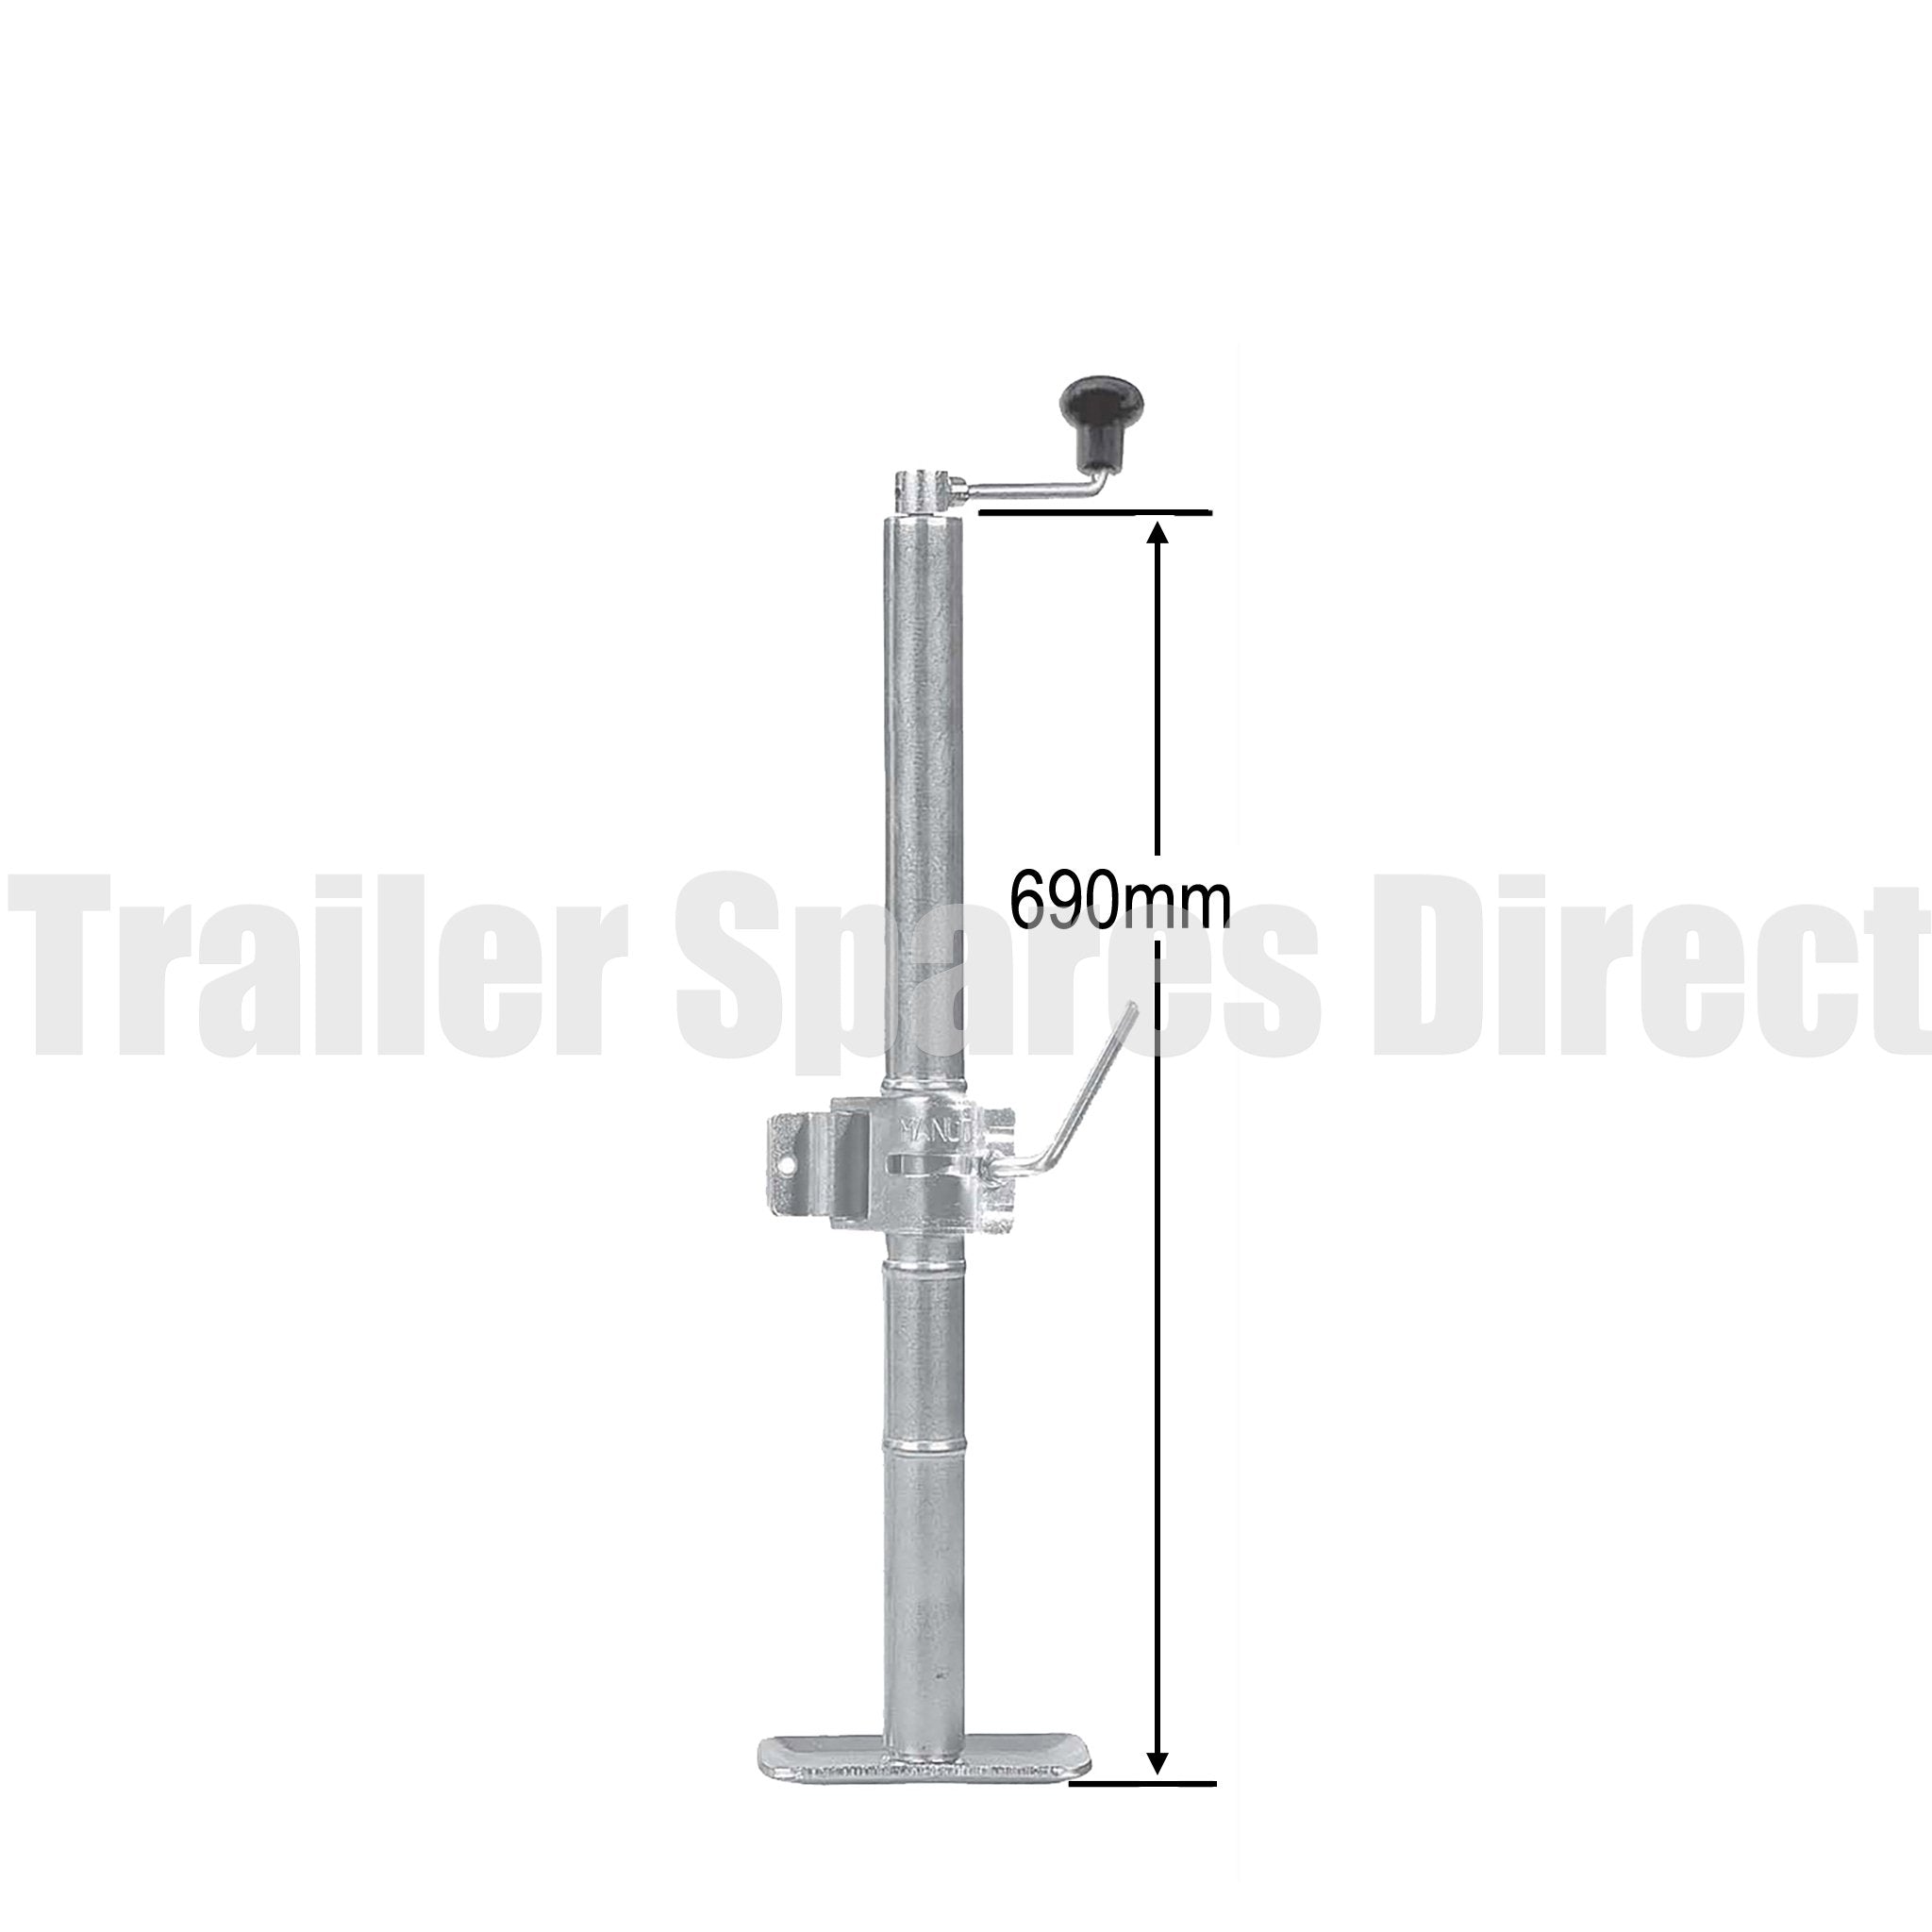 Top winding adjustable stand extended length with clamp